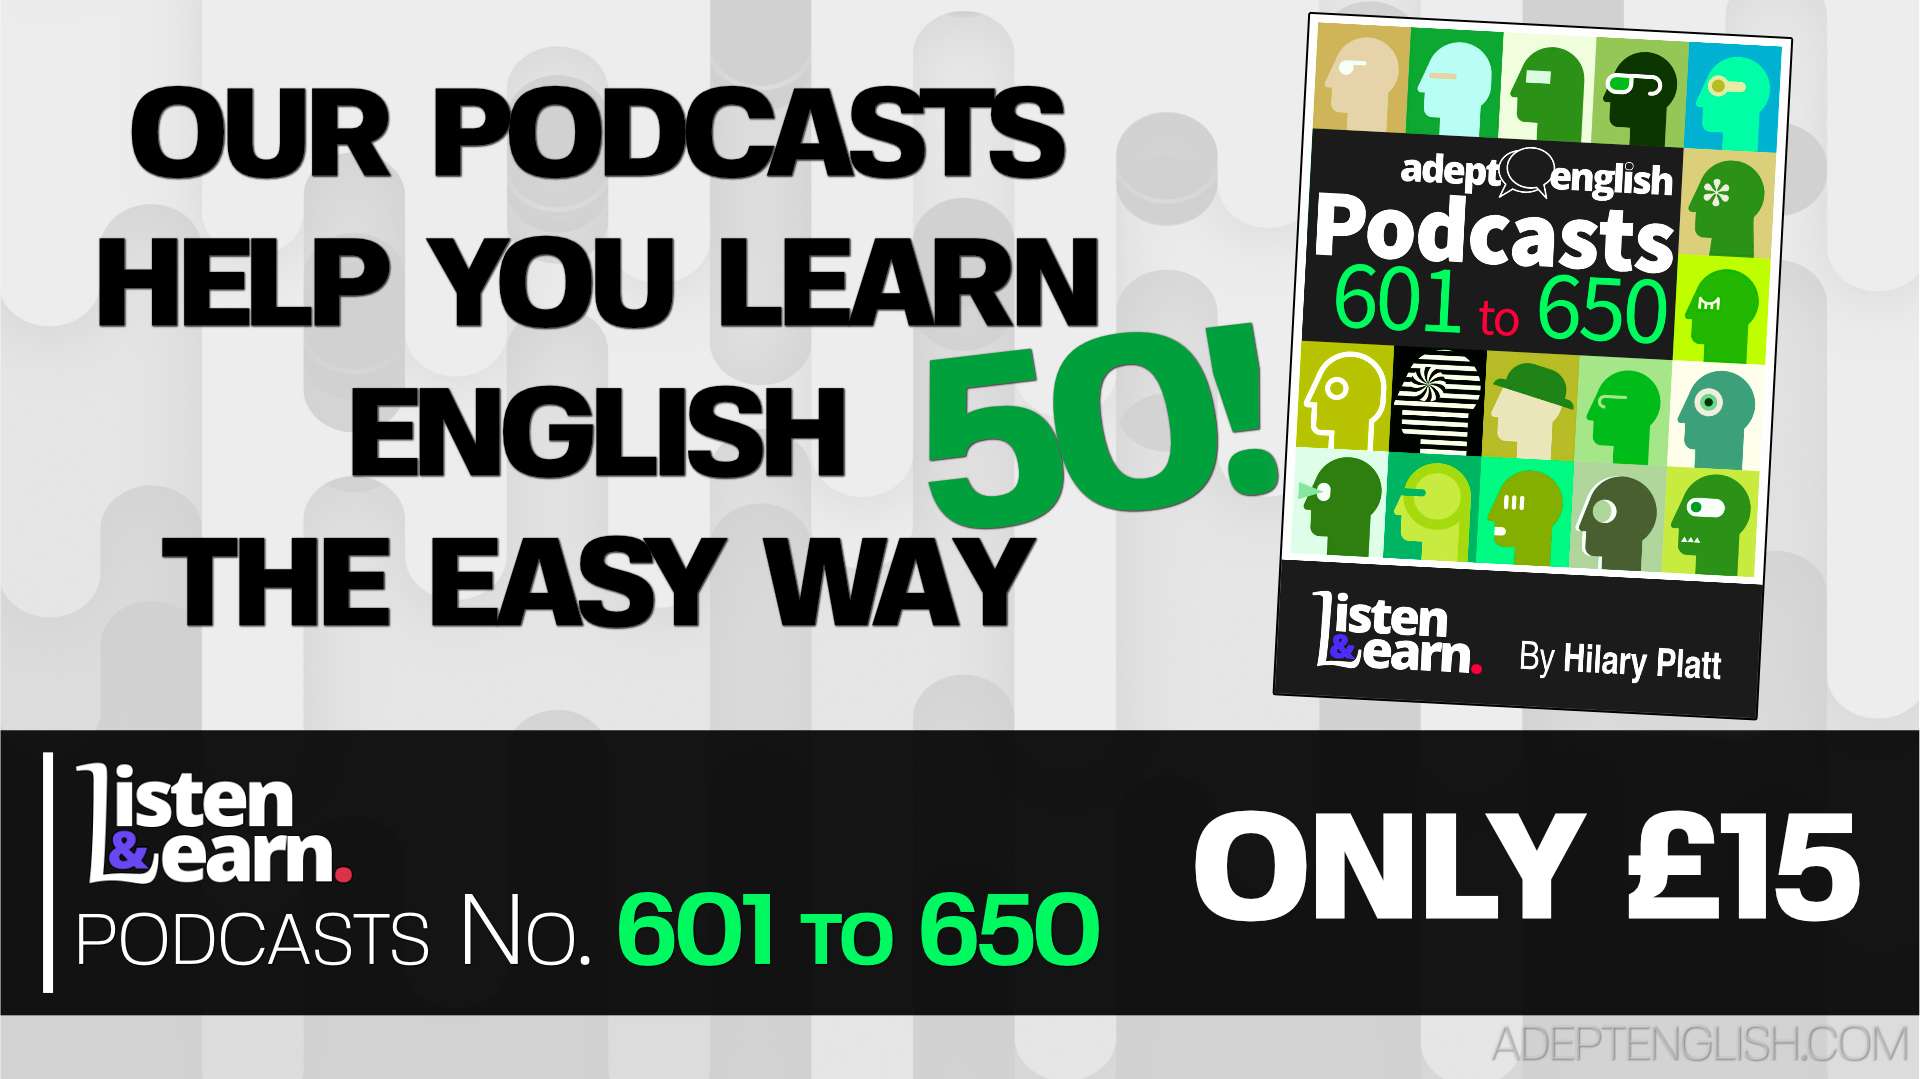 Our fun podcasts make learning a breeze! Improve your skills in just minutes a day.